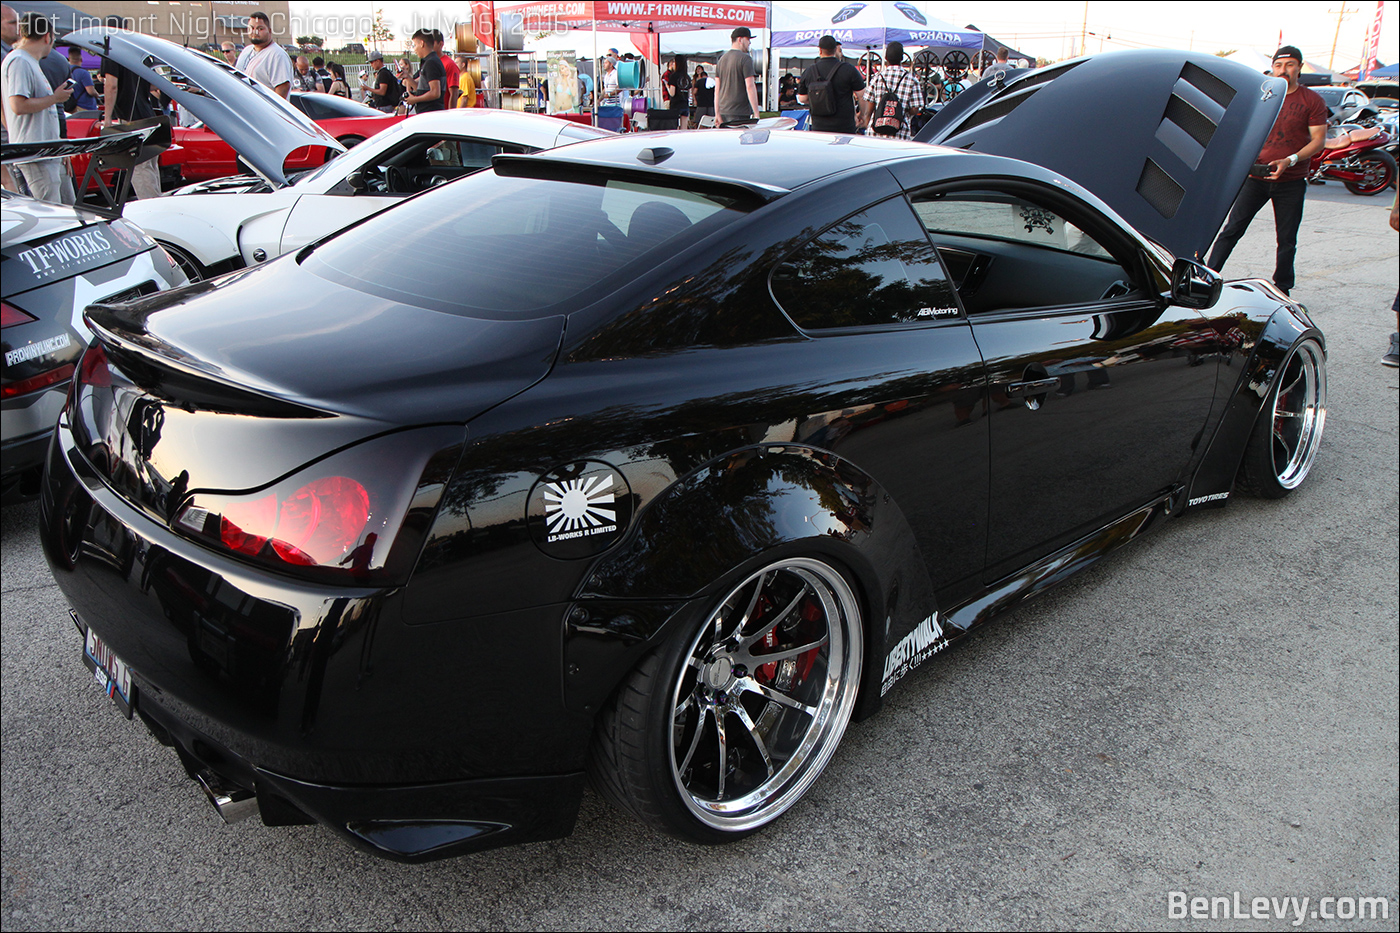 Clean Widebody Infiniti G37 Coupe